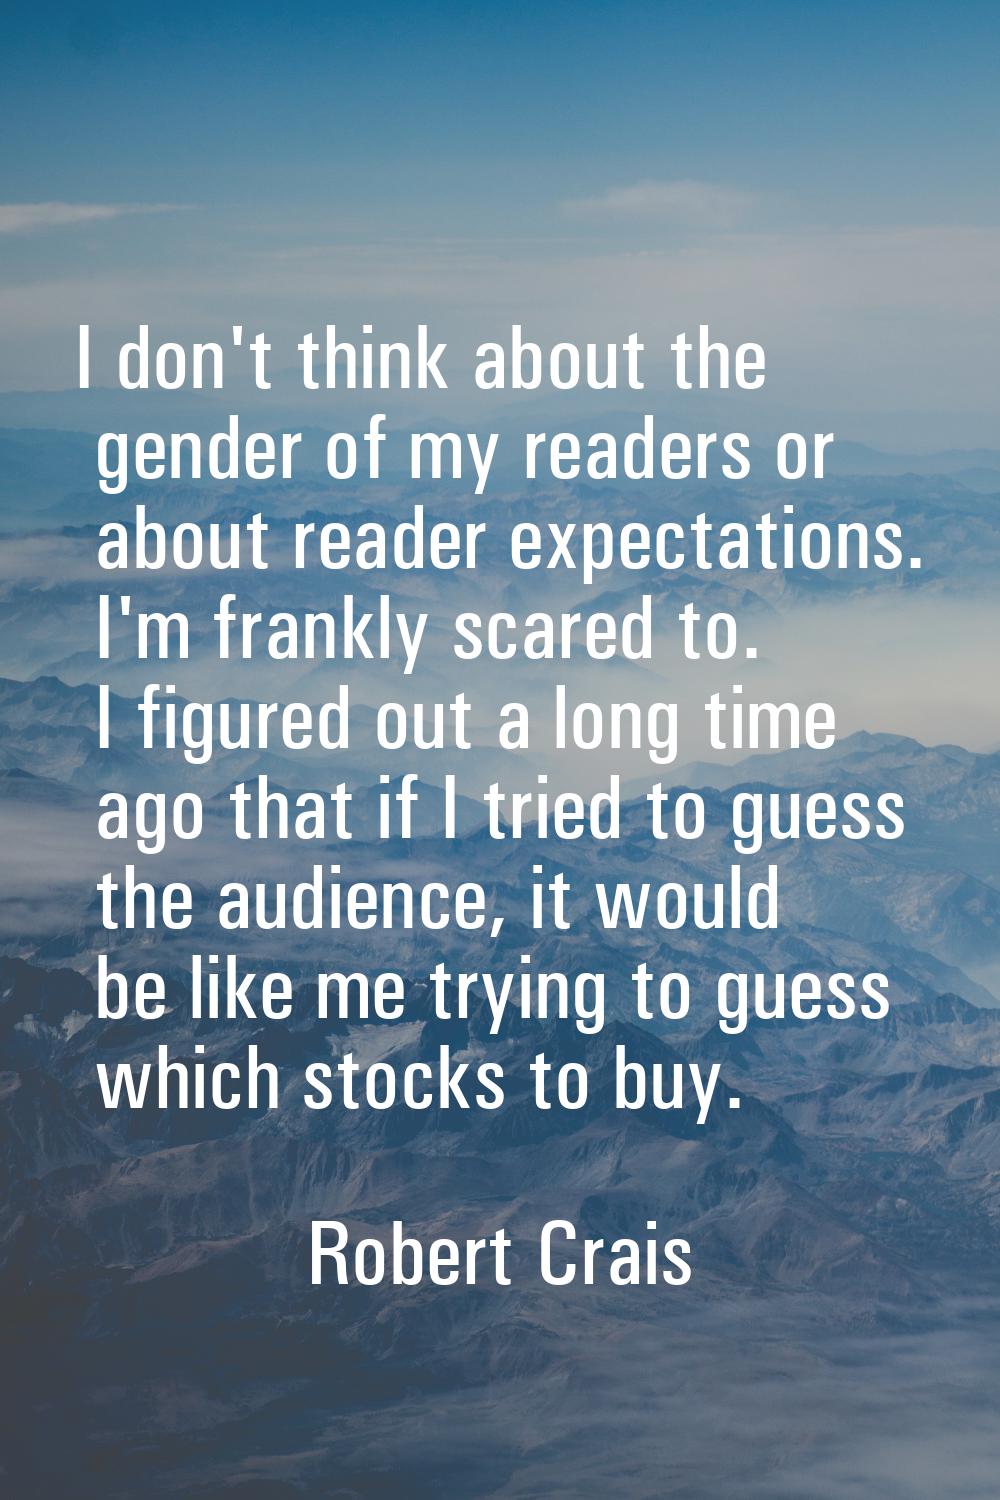 I don't think about the gender of my readers or about reader expectations. I'm frankly scared to. I